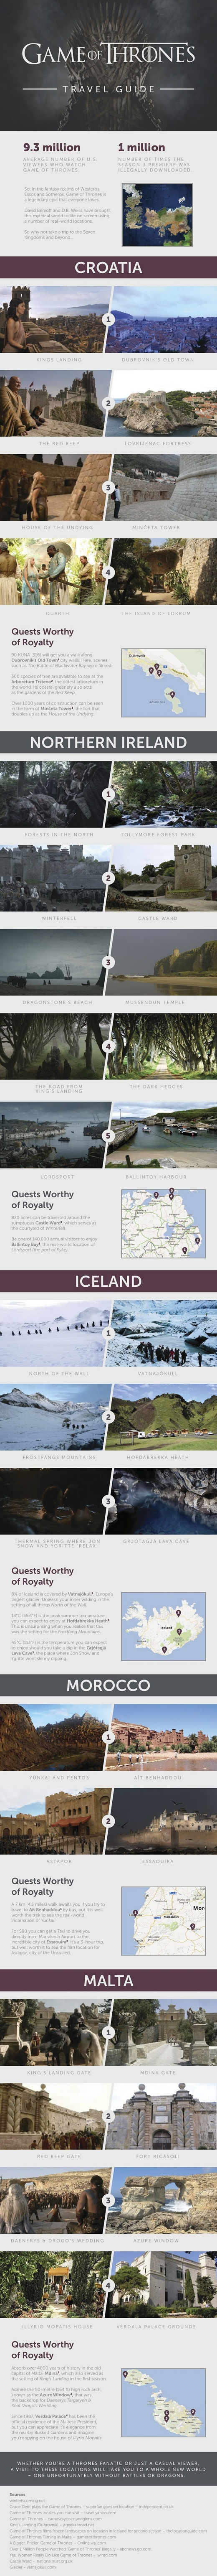 Game of Thrones Travel Guide